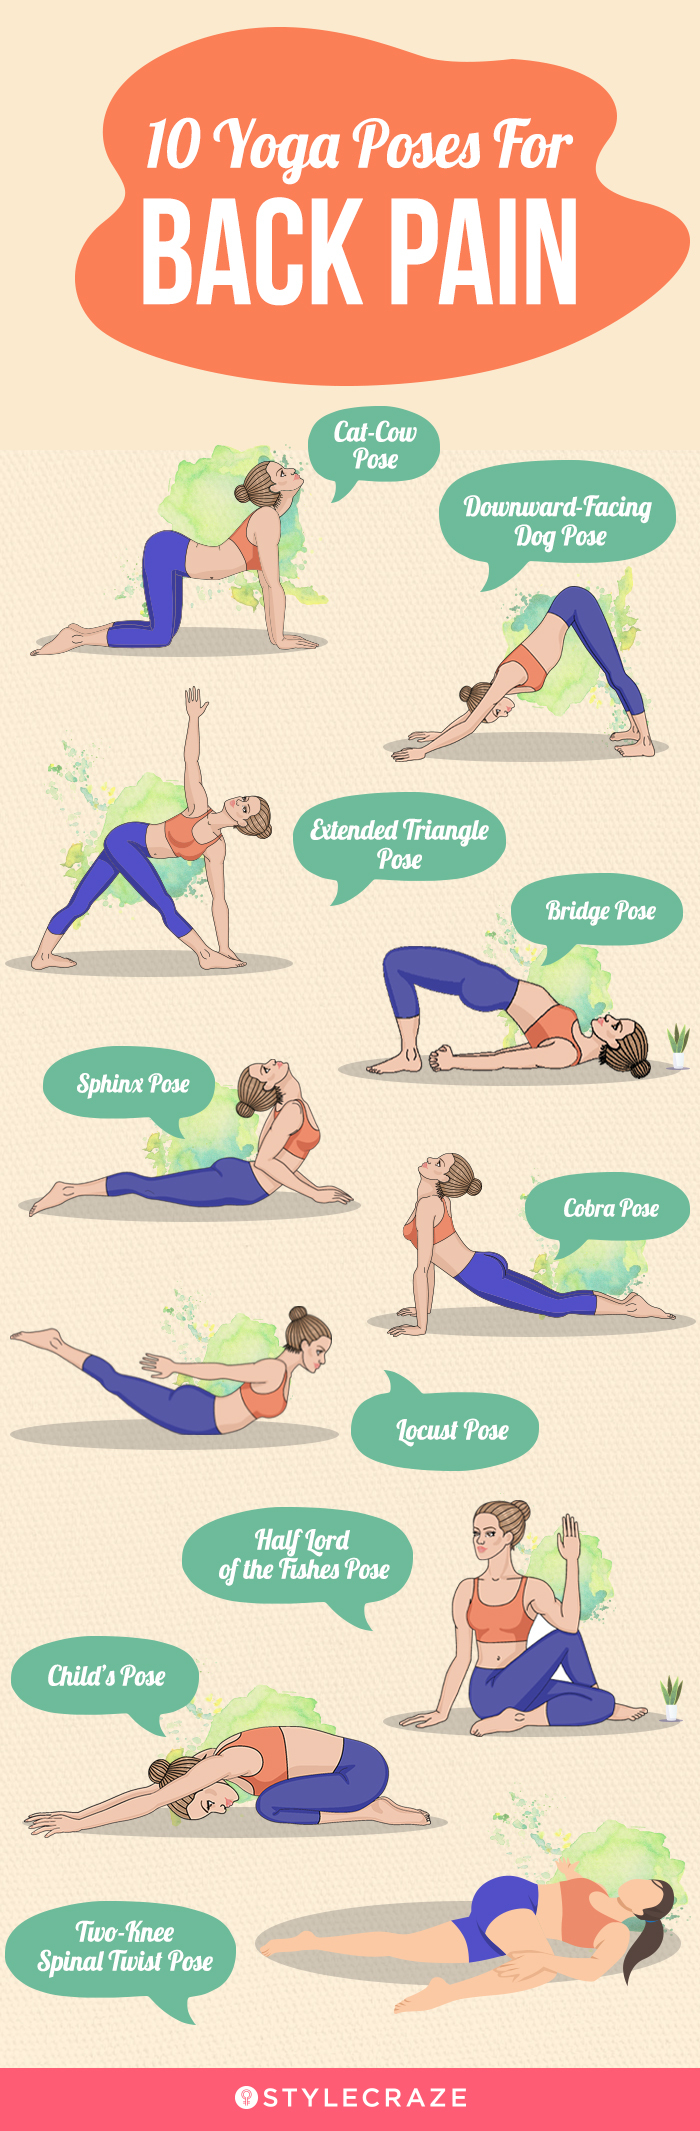 10 yoga poses for back pain [infographic]